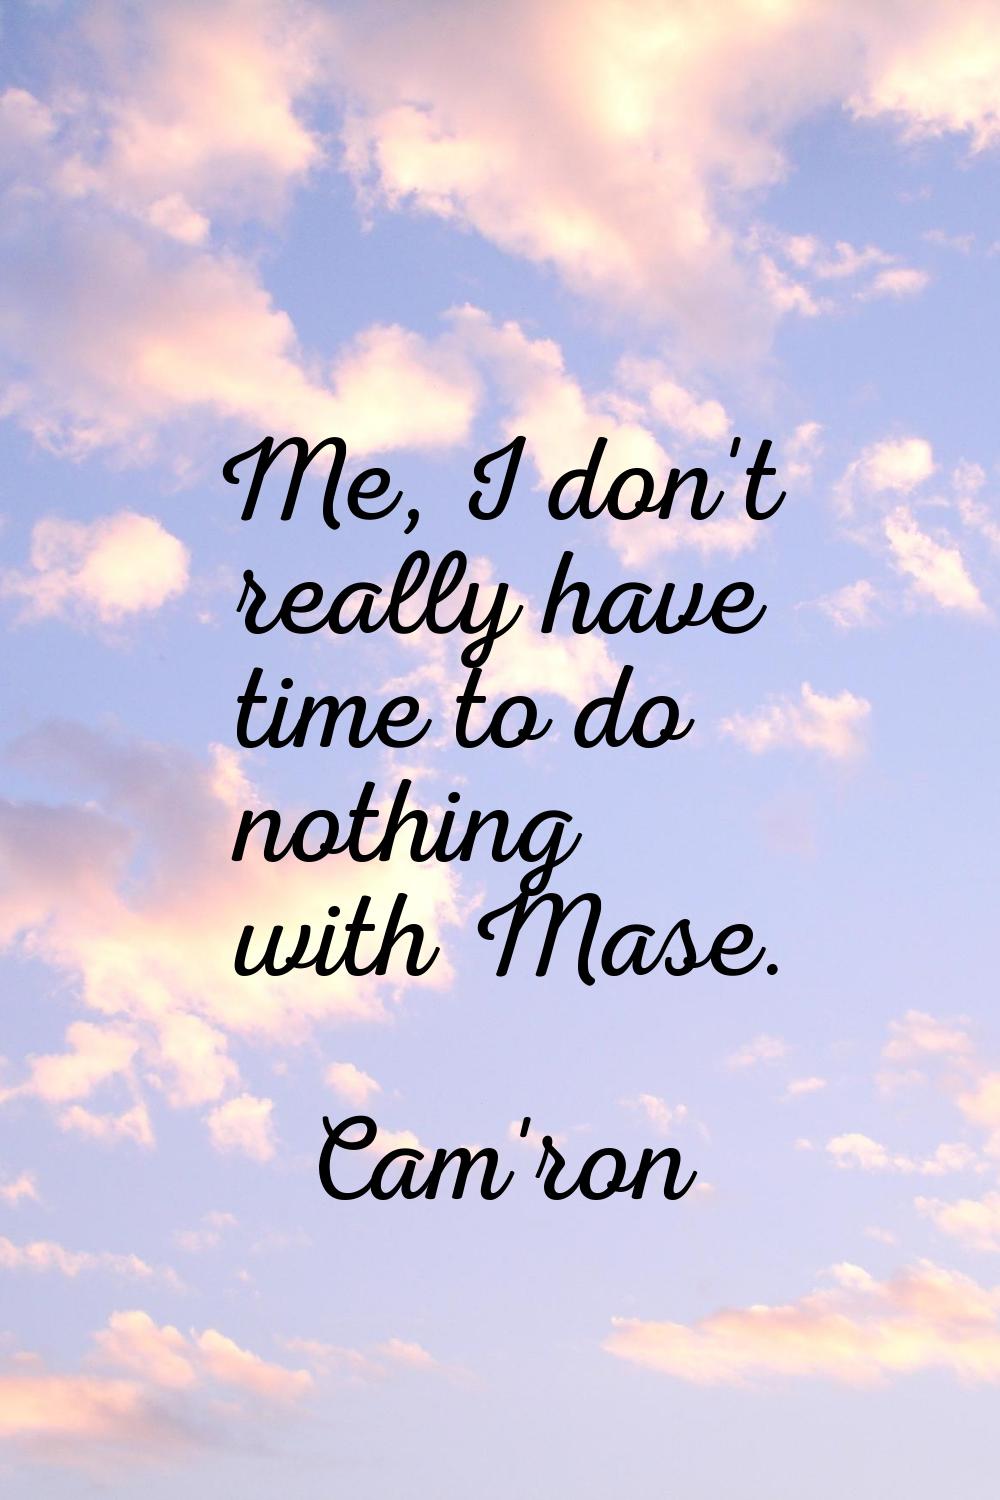 Me, I don't really have time to do nothing with Mase.